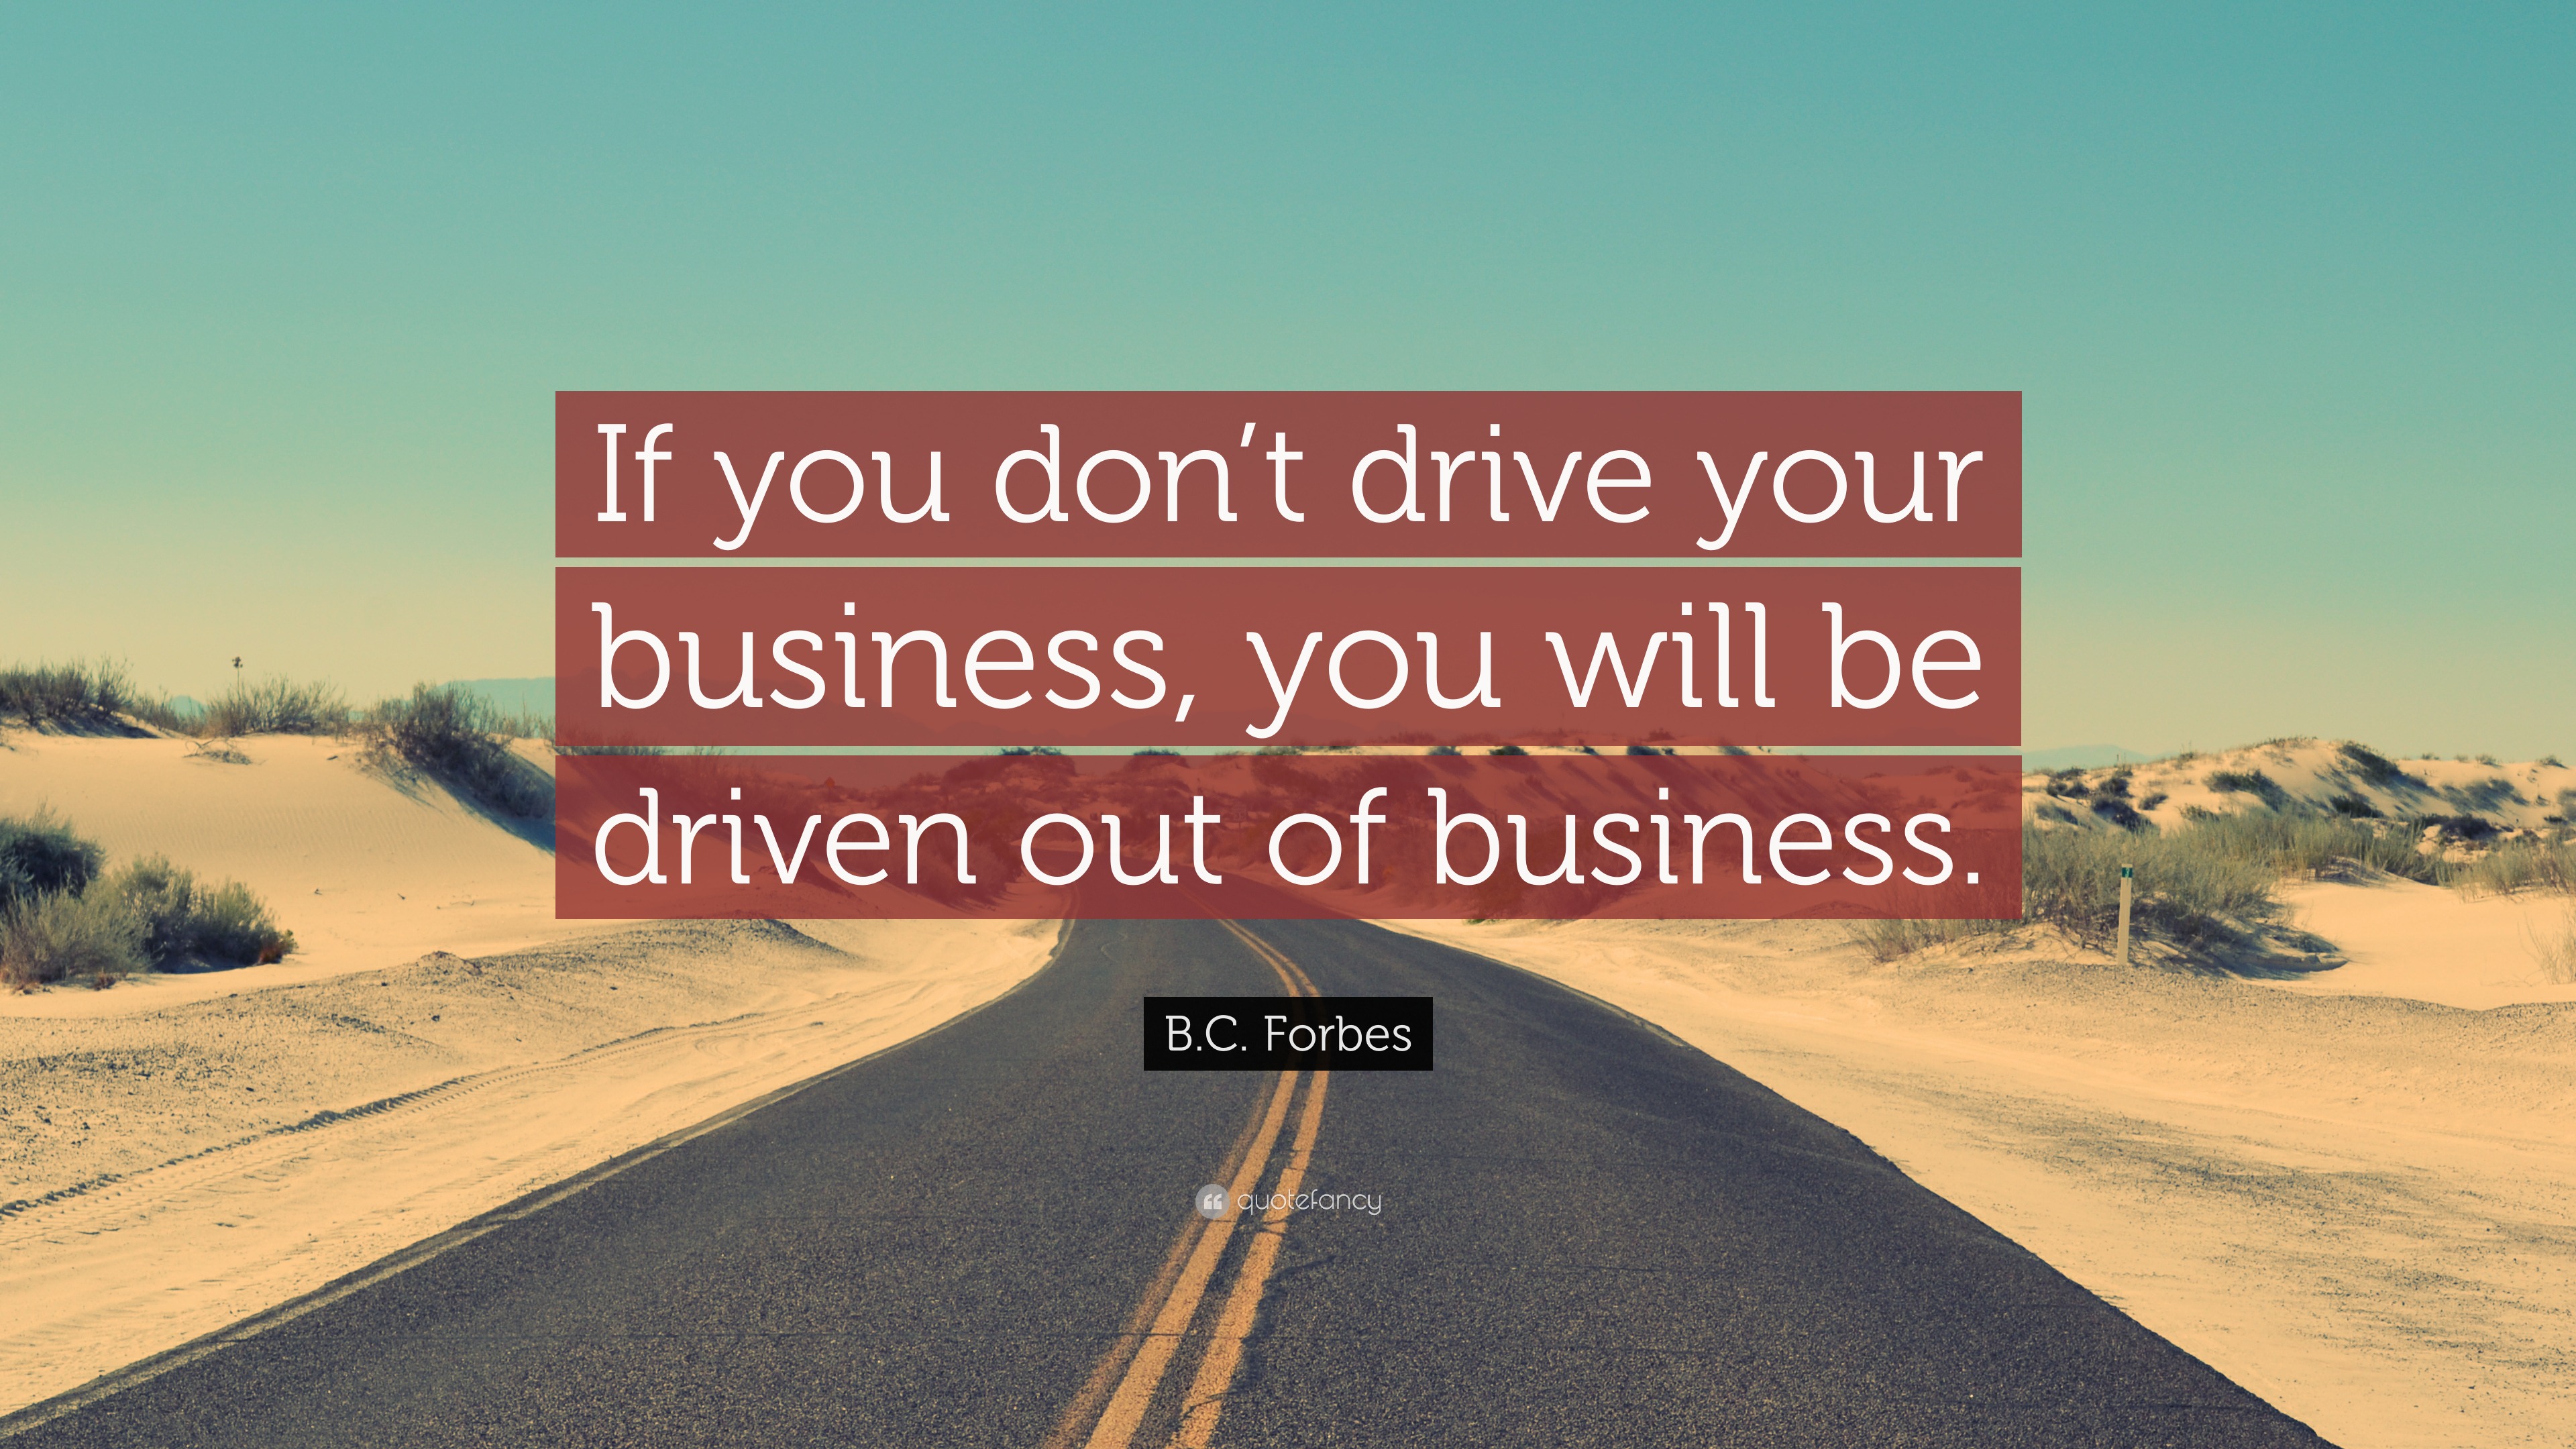 B.C. Forbes Quote: “If you don’t drive your business, you will be